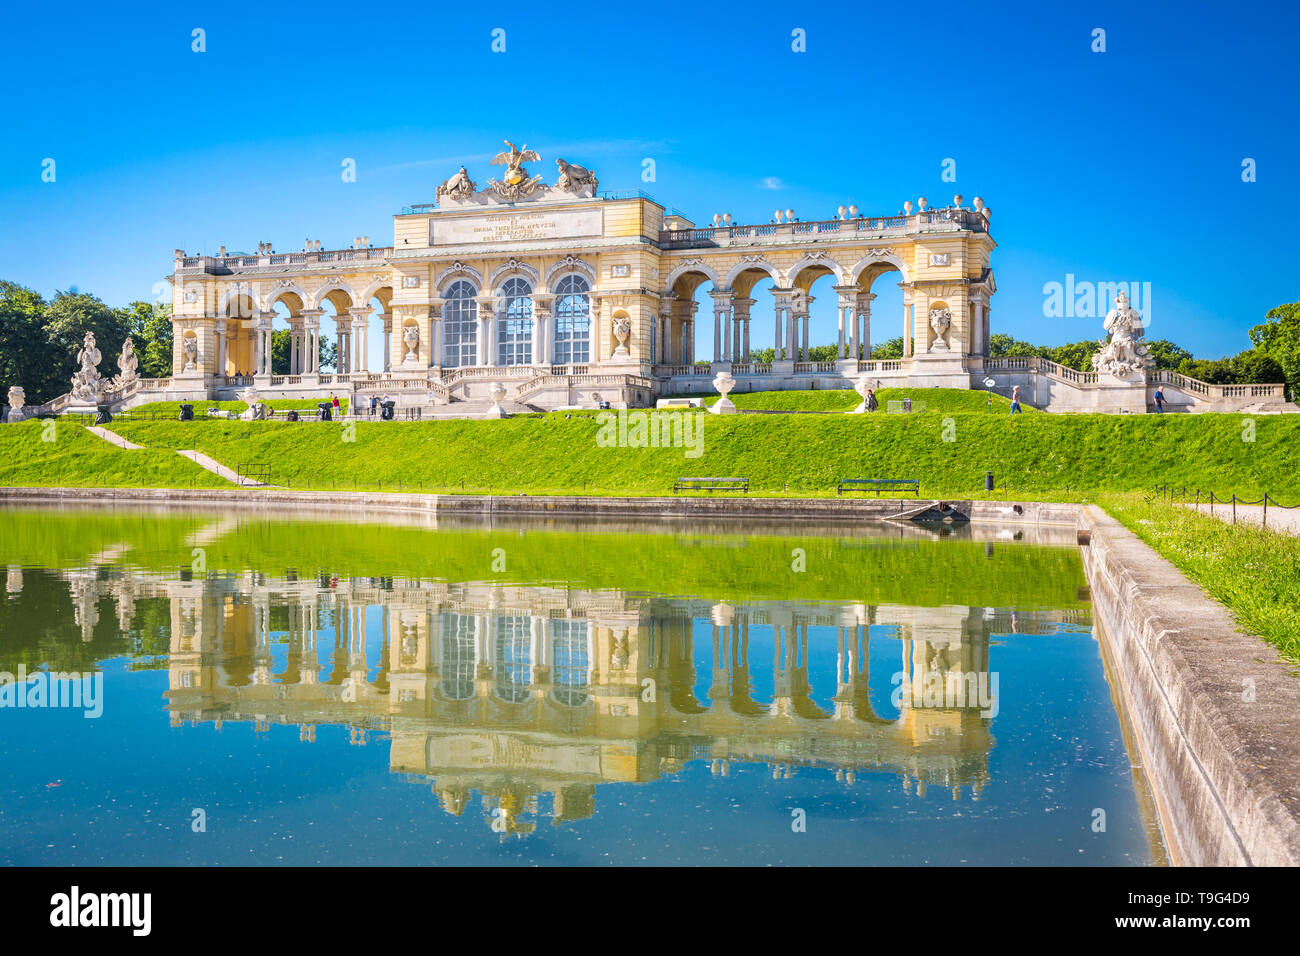 View of Gloriette at Schoenbrunn Palace in Vienna Stock Photo